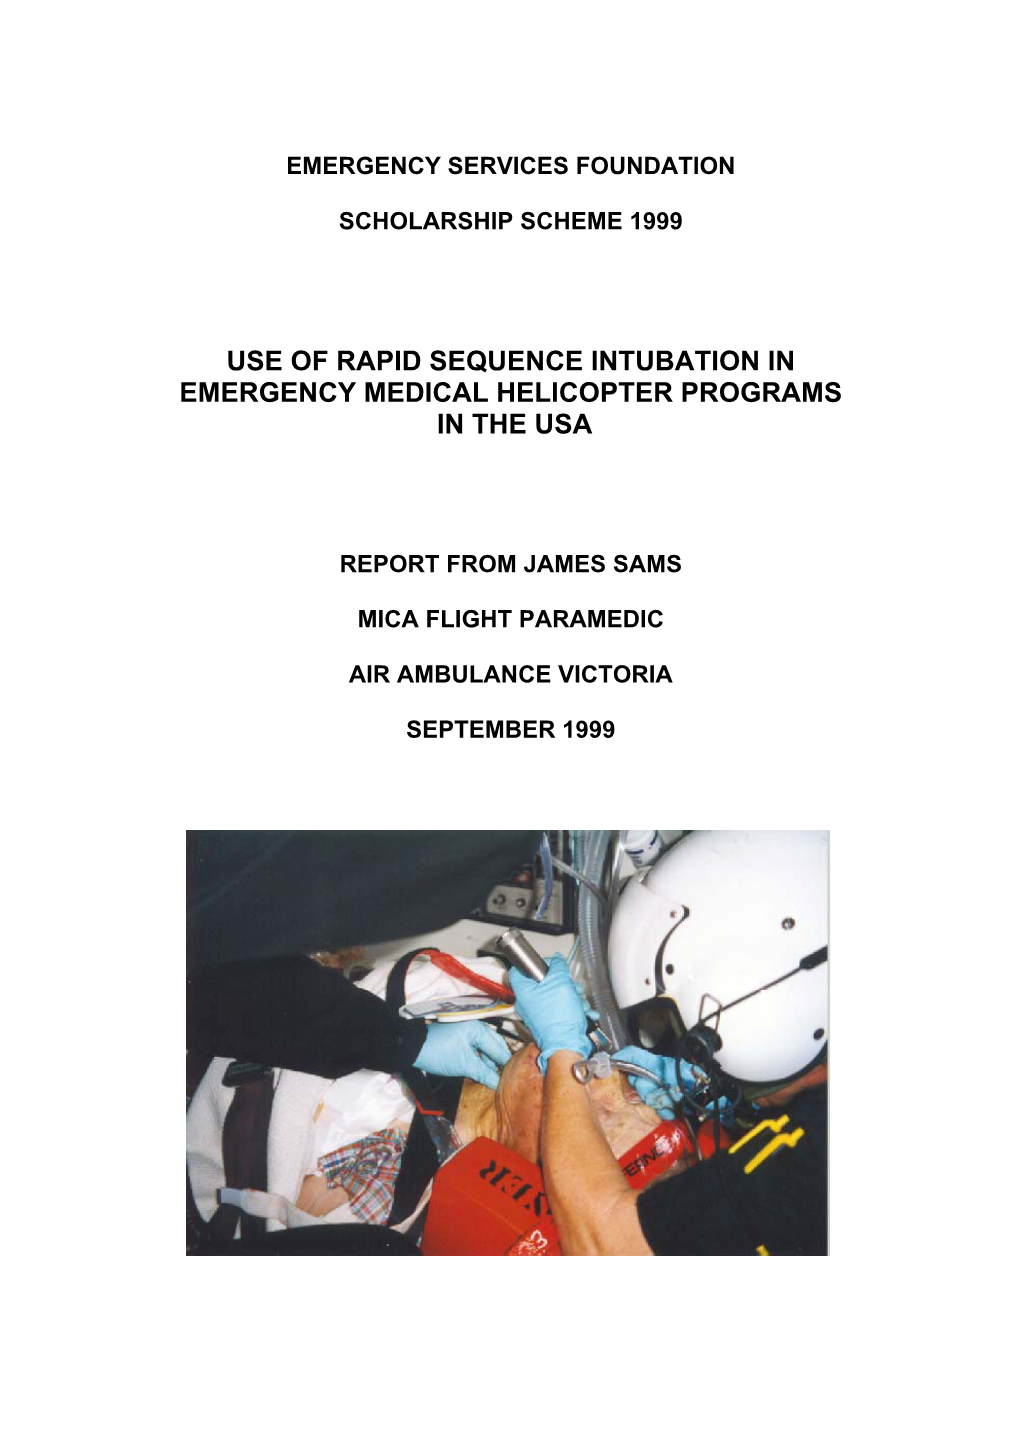 Use of Rapid Sequence Intubation in Emergency Medical Helicopter Programs in the Usa